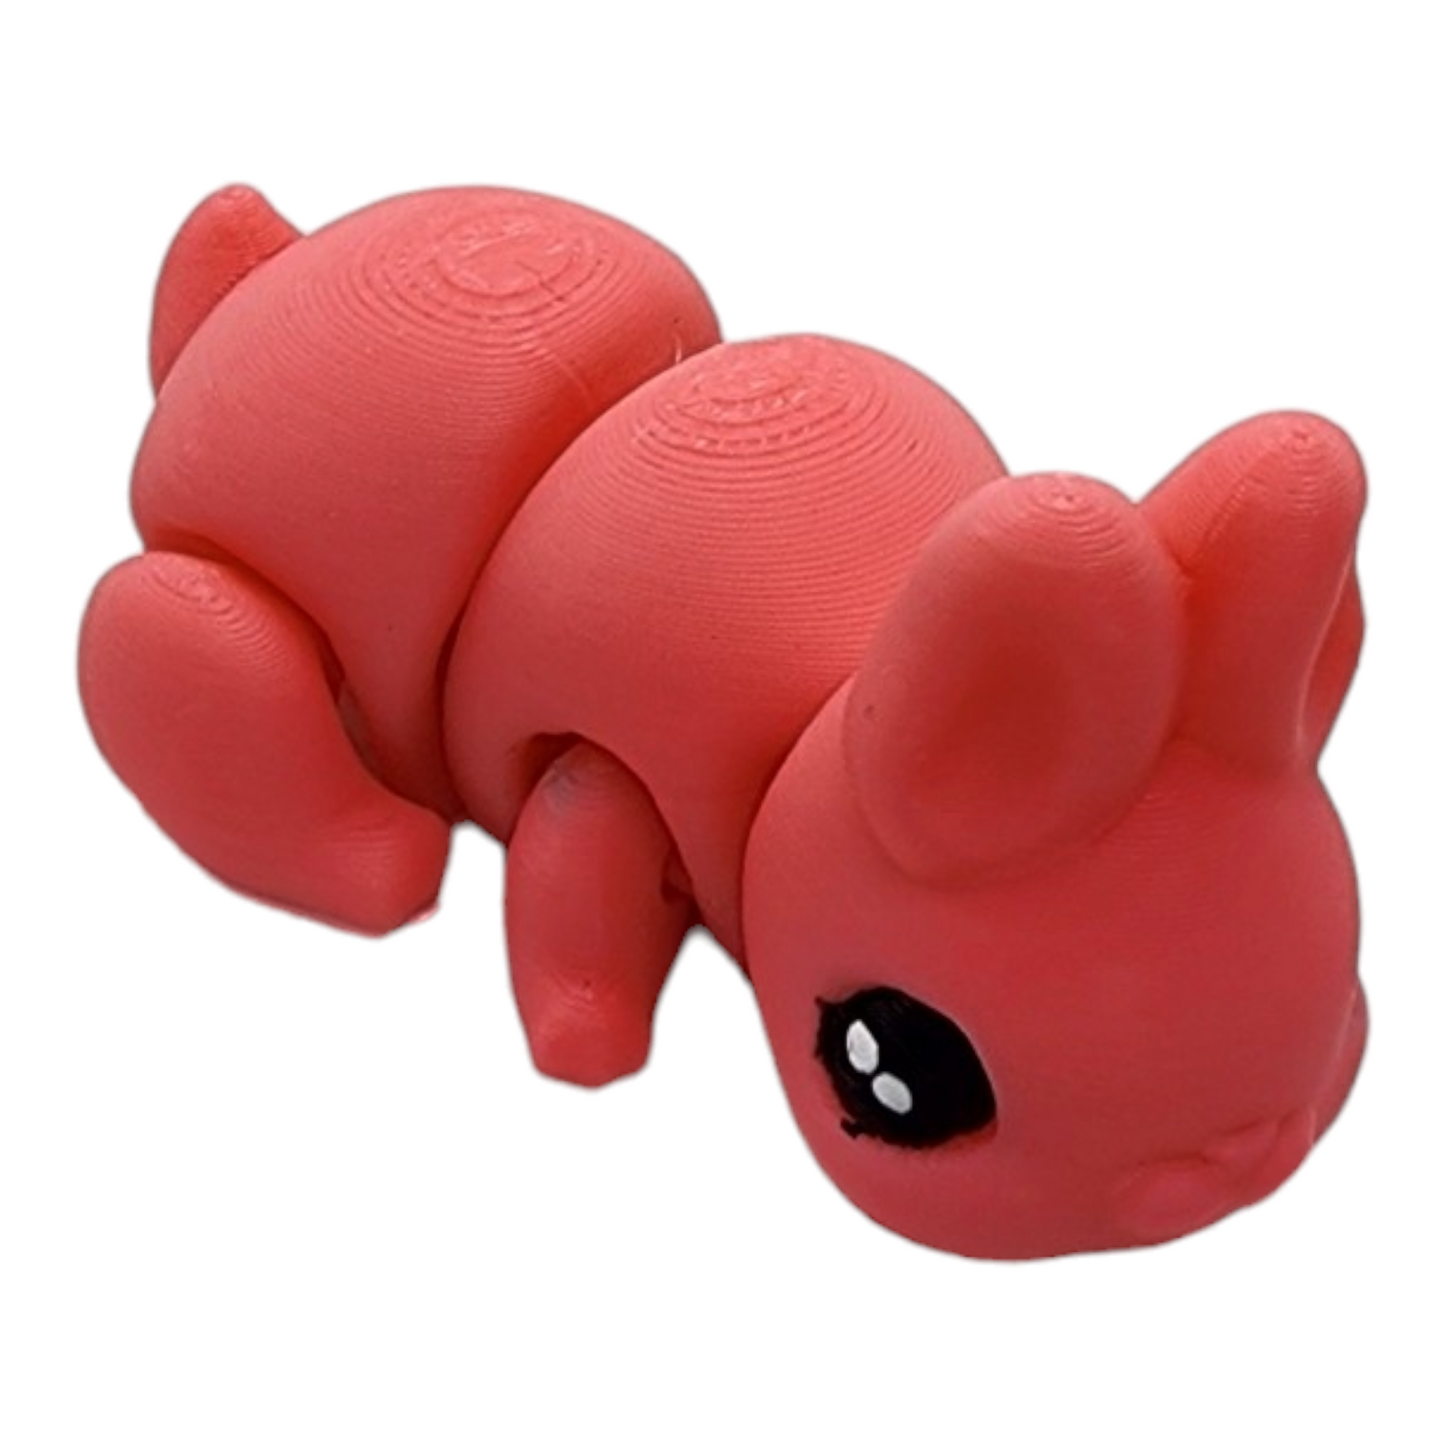 3-D Printed Articulated Bunny